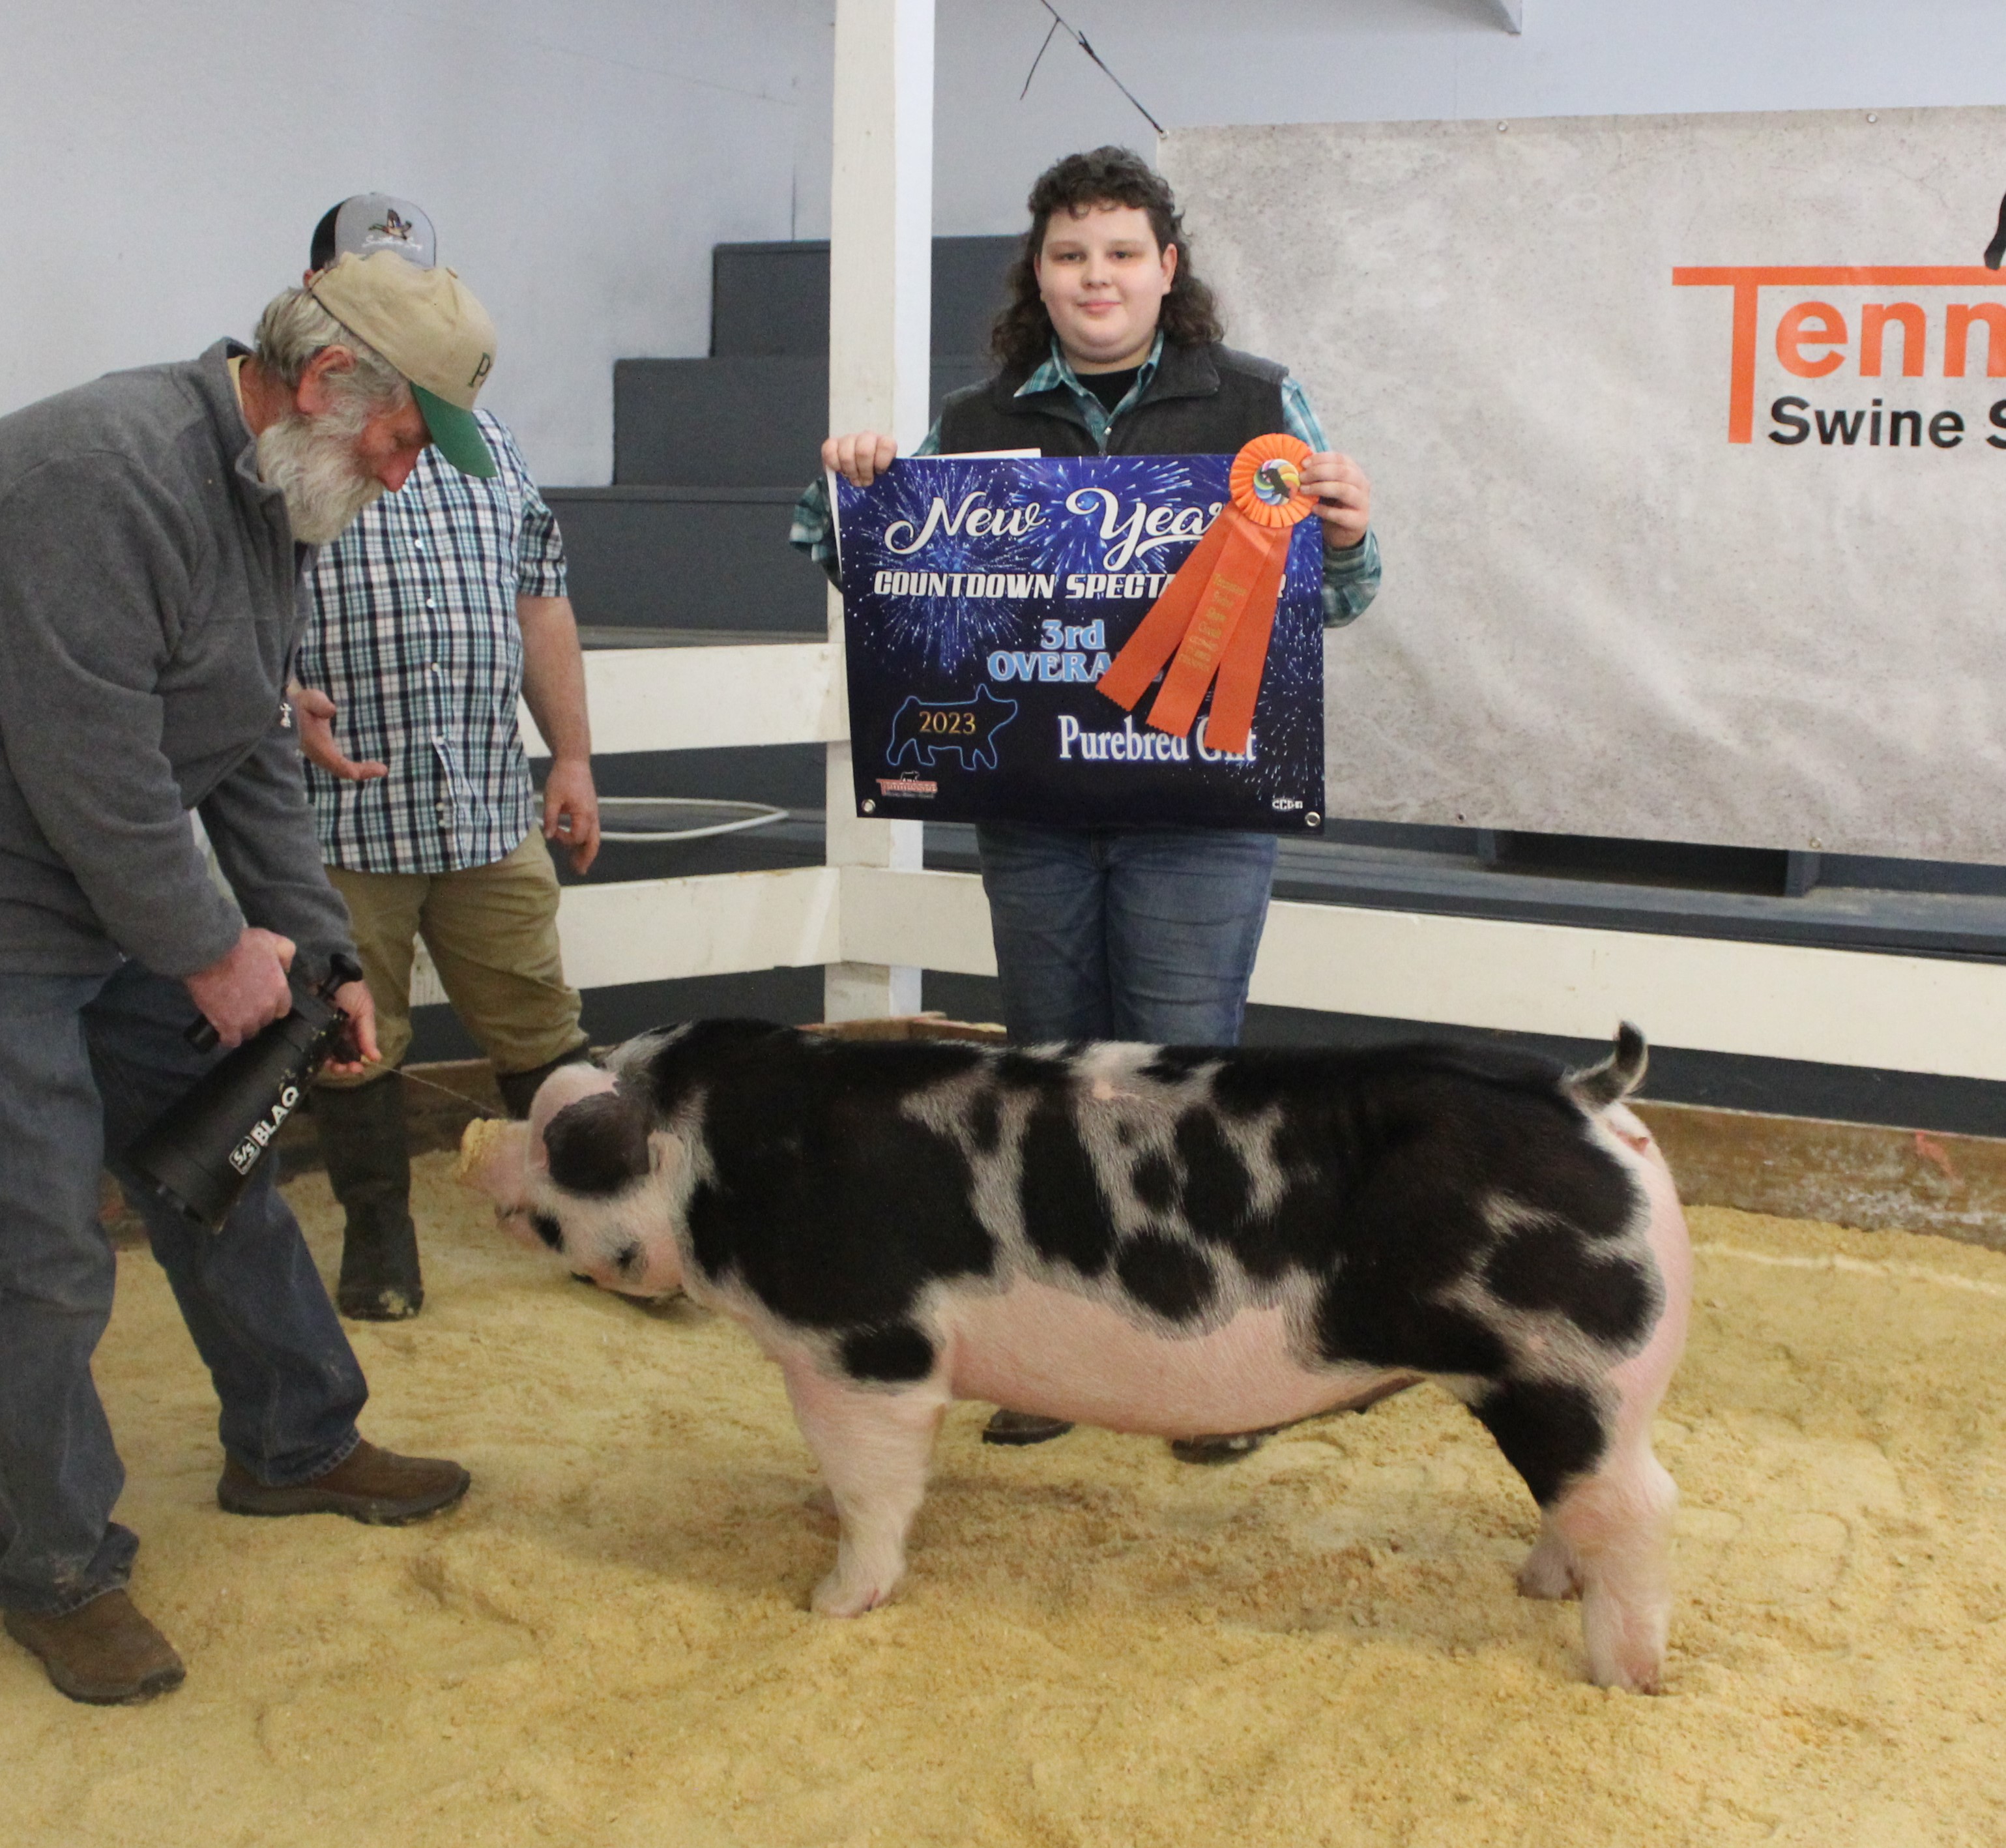 Holden Shuler
2022 New Year's Countdown Spectacular
Day 2 - Champion Spot Gilt
3rd Overall Purebred Gilt